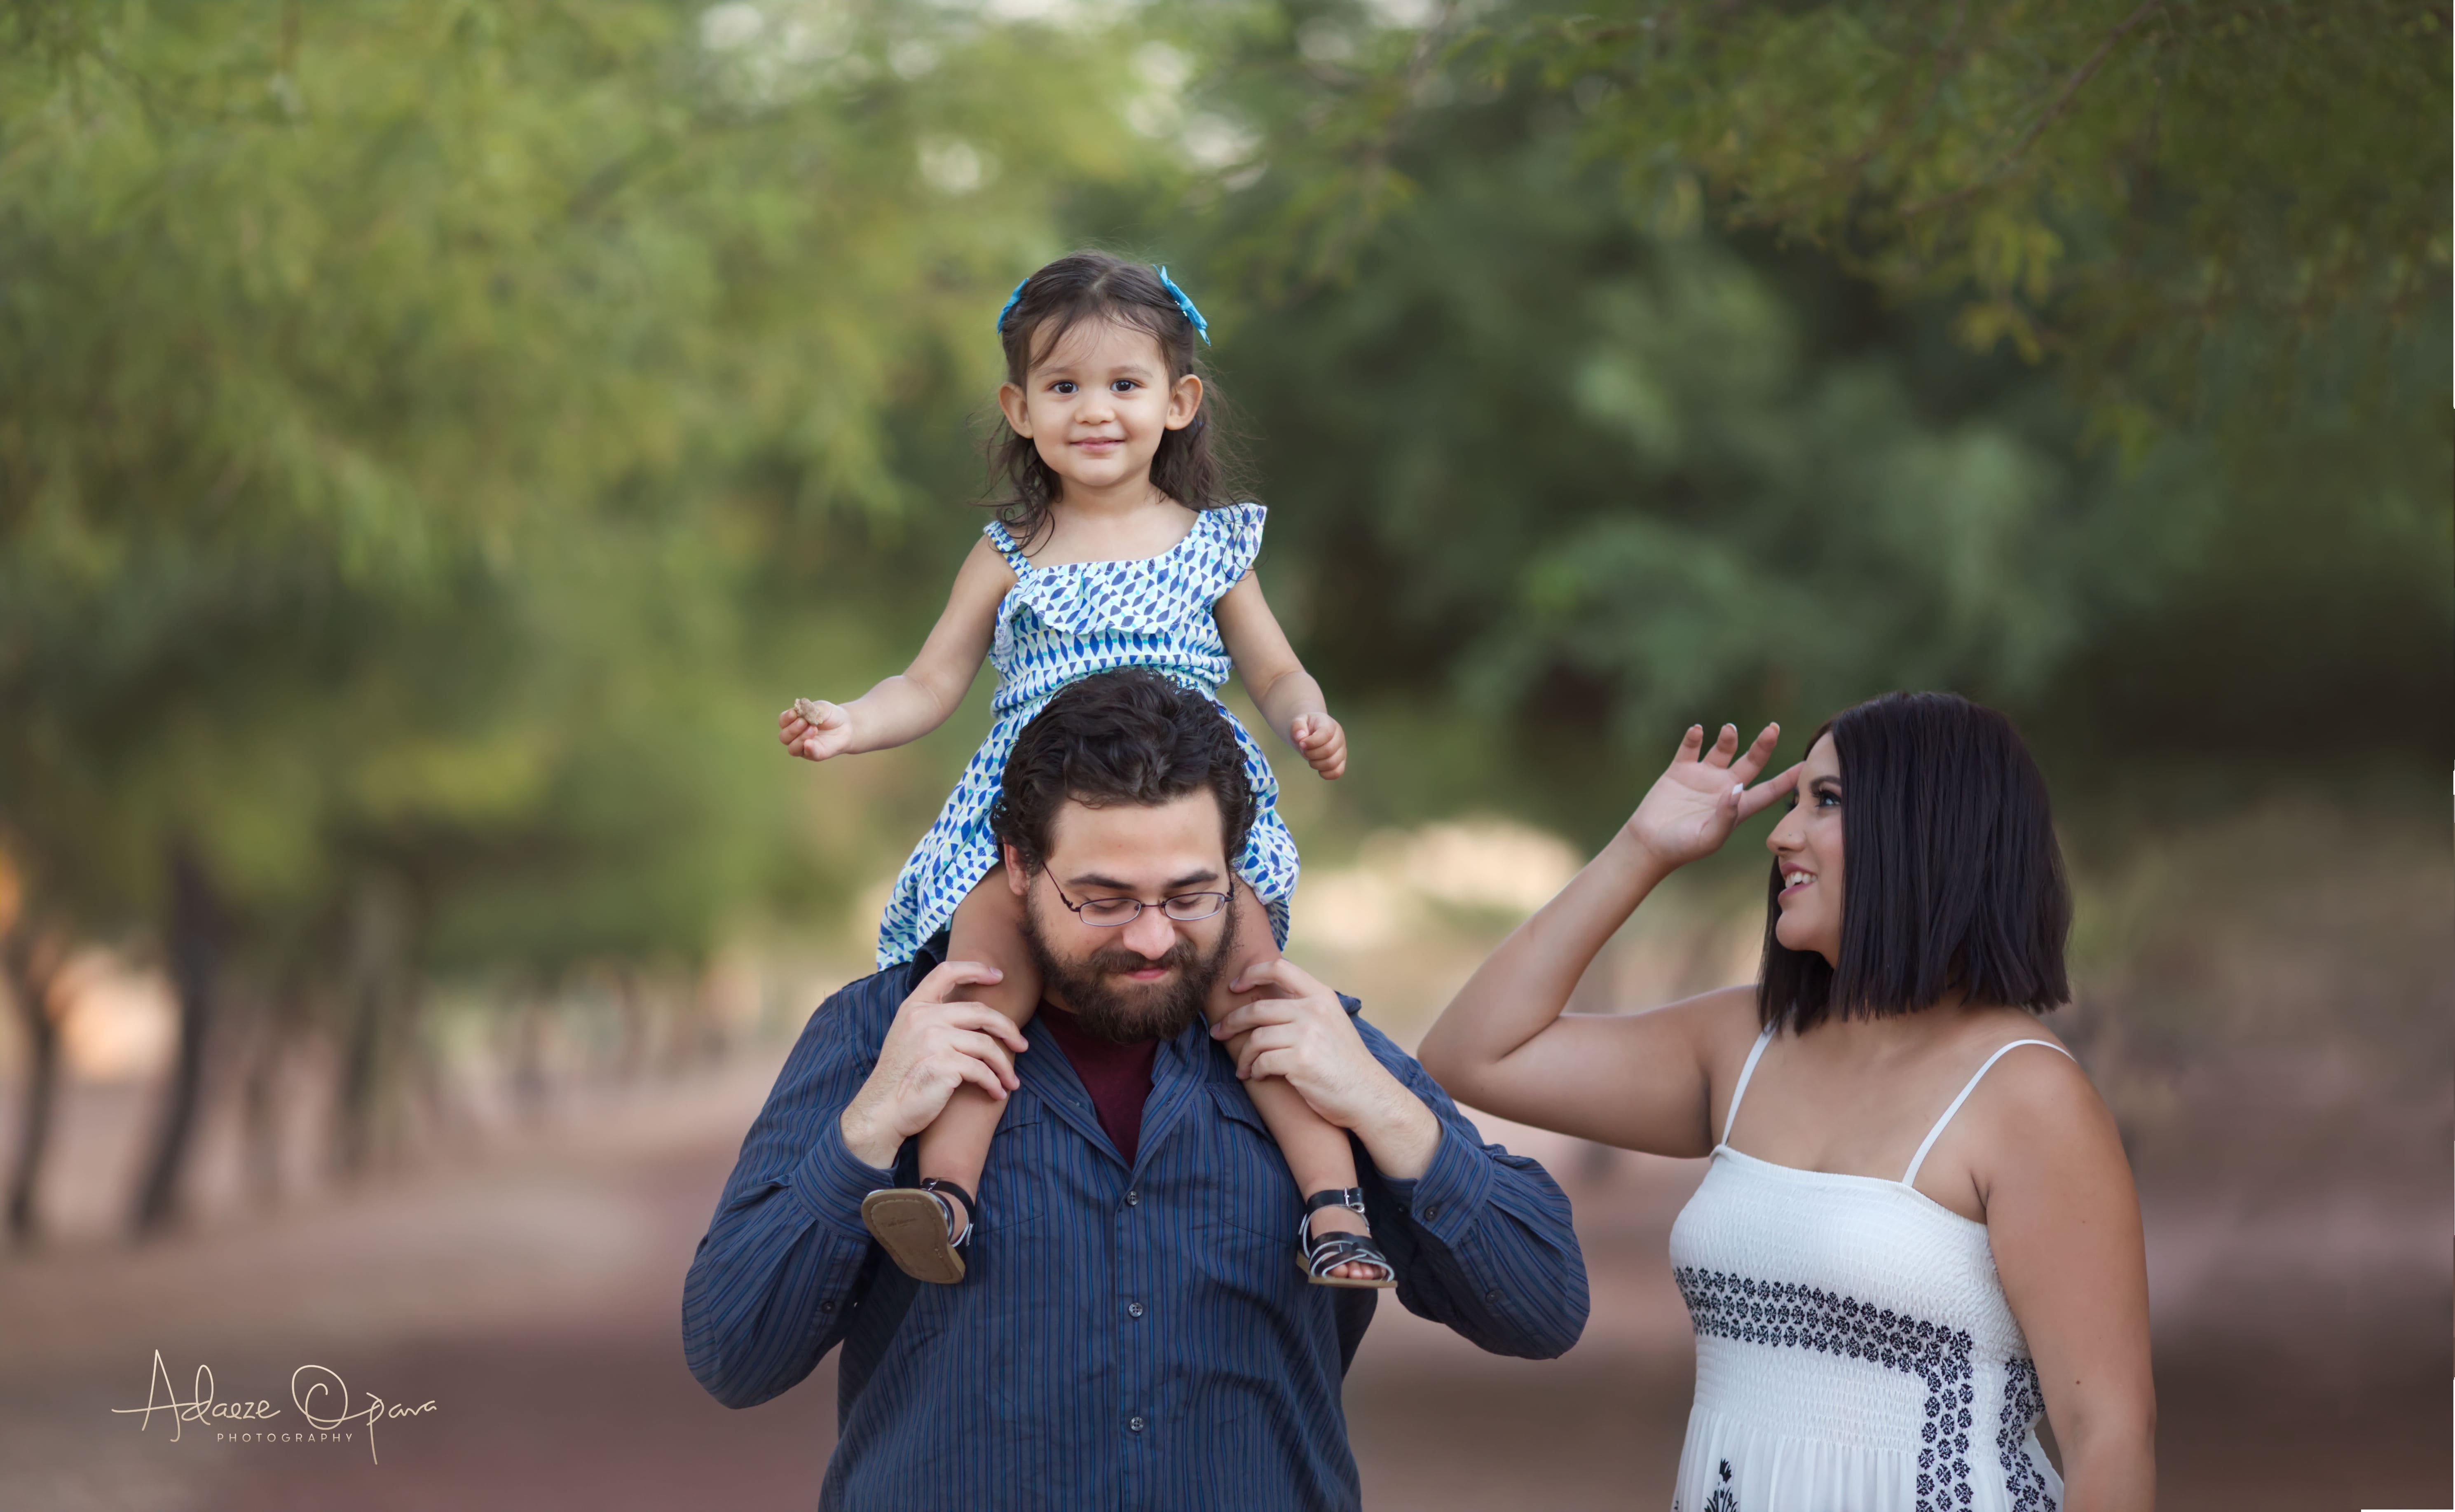 20 Best Spring Family Photoshoot Outfits to Try This Spring | Family  portrait outfits, Family photo outfits, Family photoshoot poses